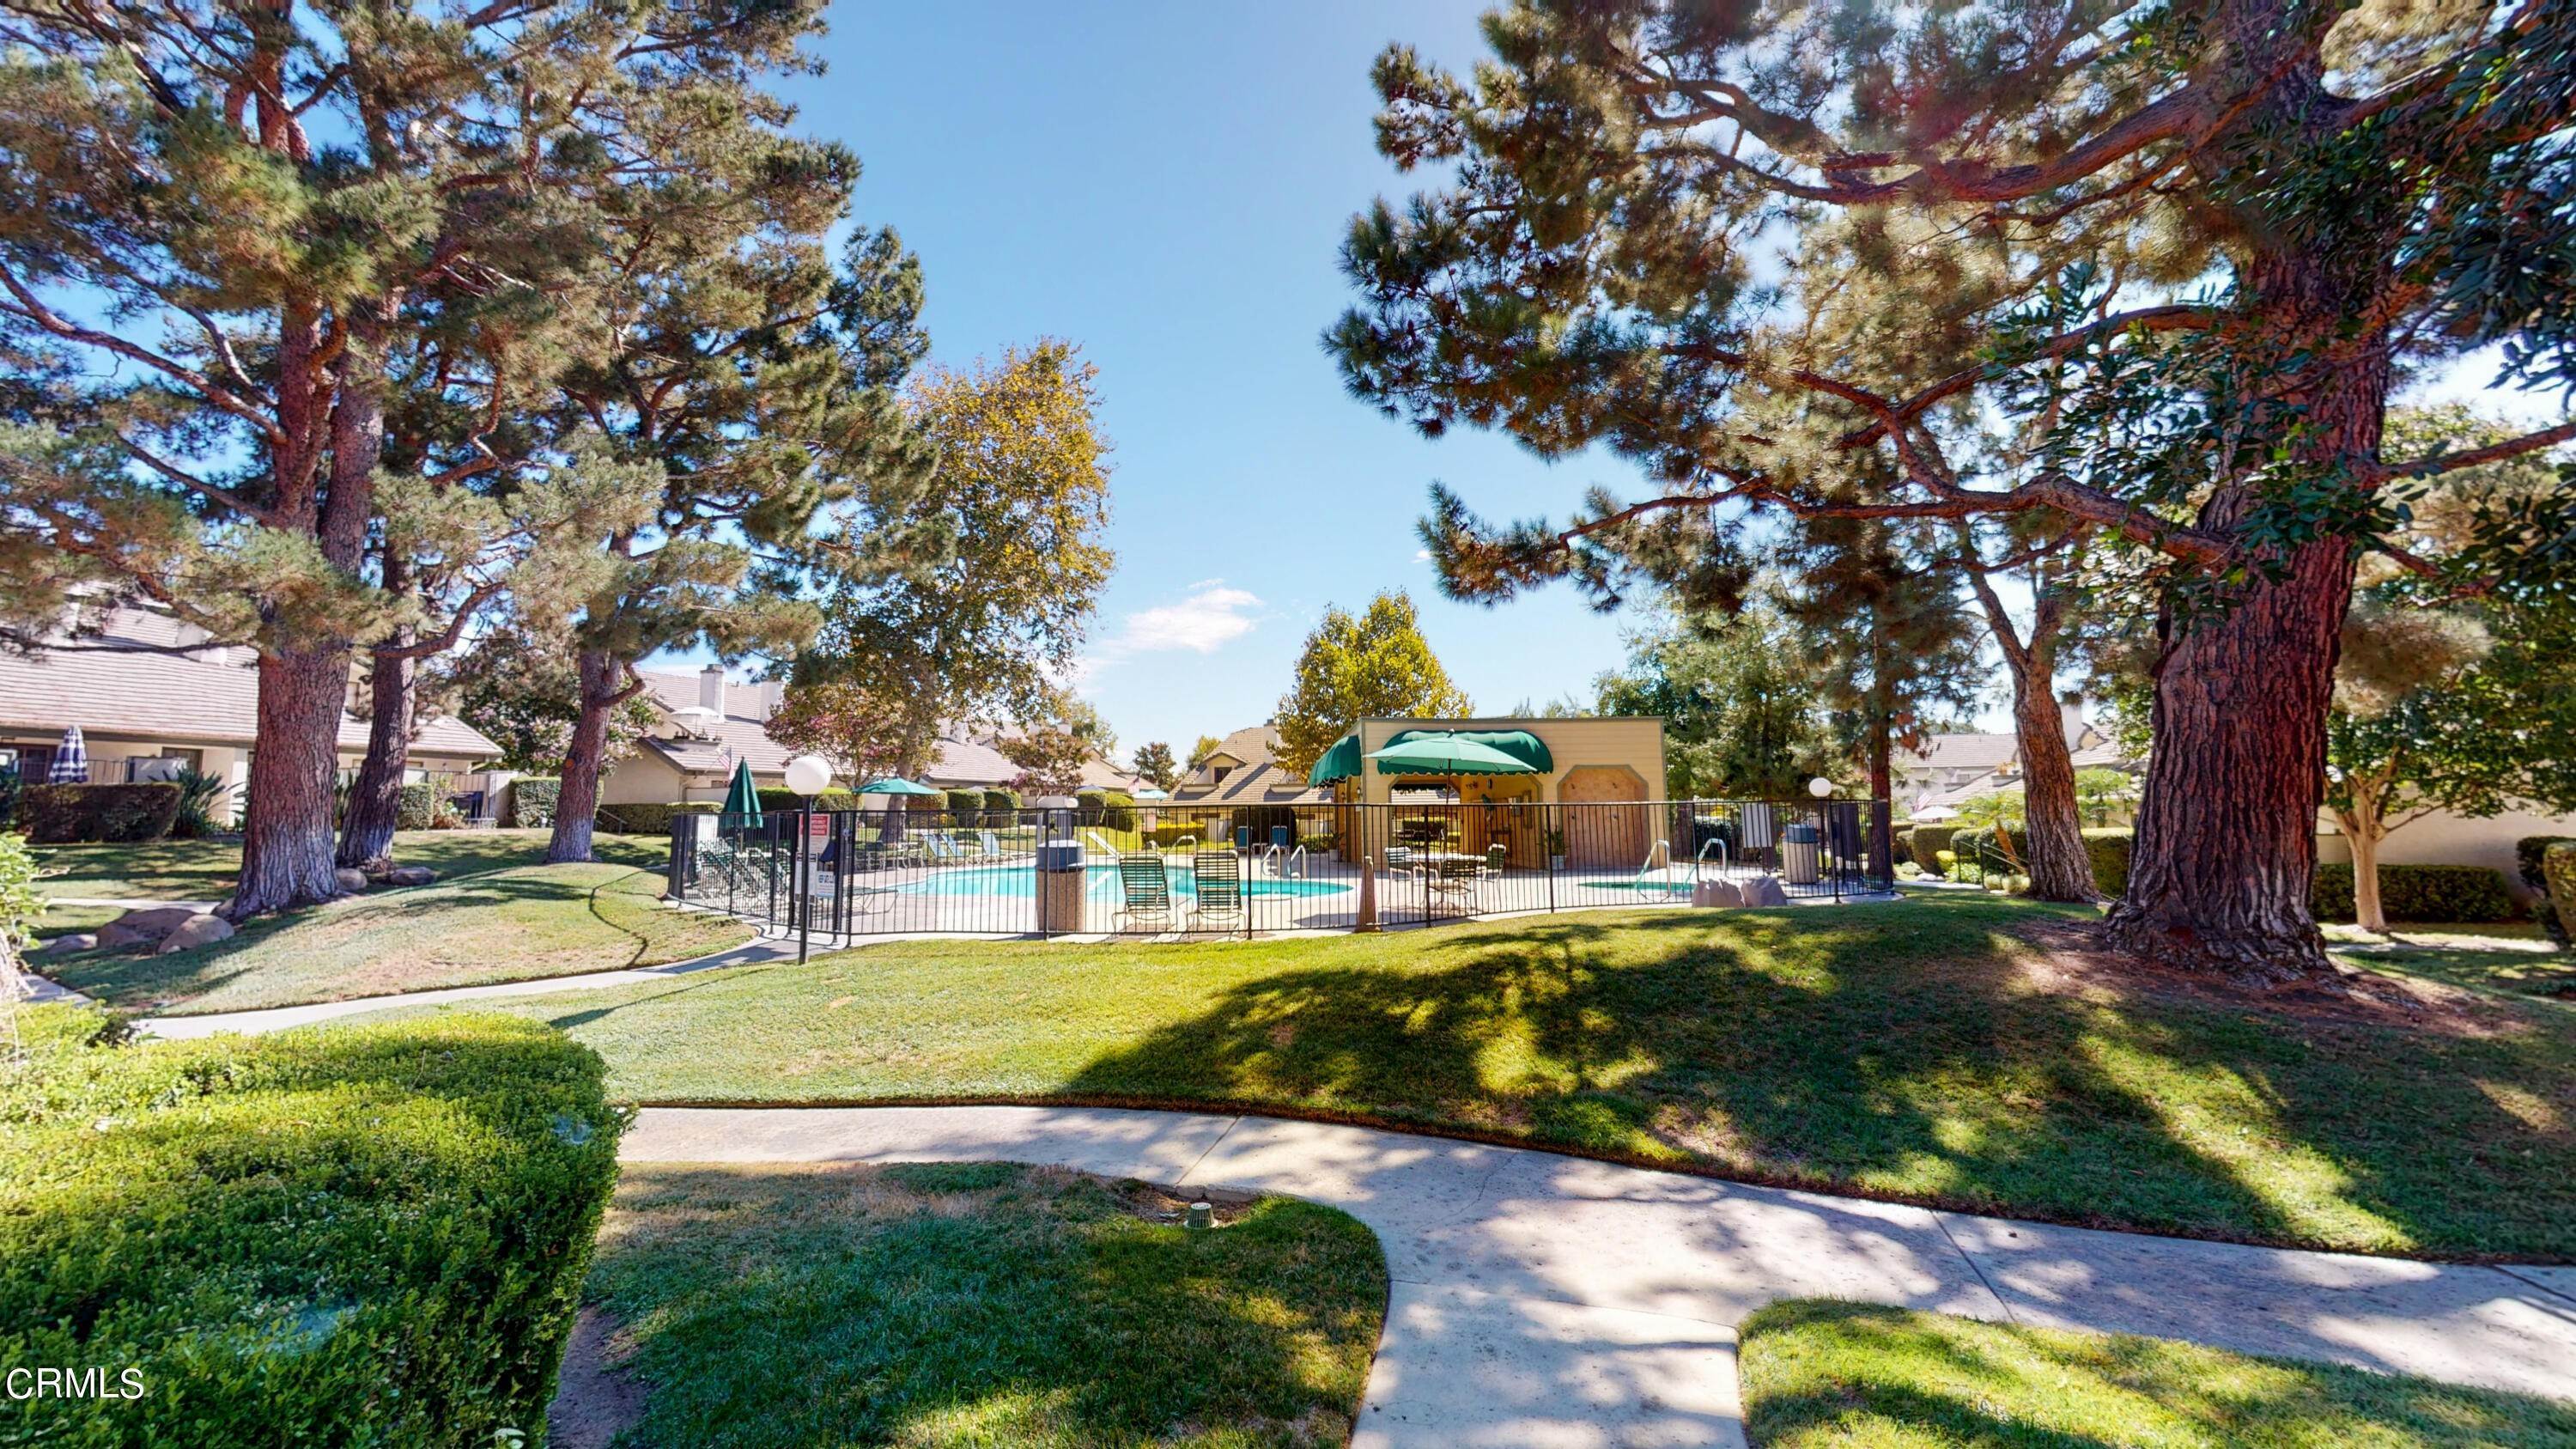 5. Condominiums for Sale at 964 West Arrow Highway A #A 964 West Arrow Highway A Upland, California 91786 United States